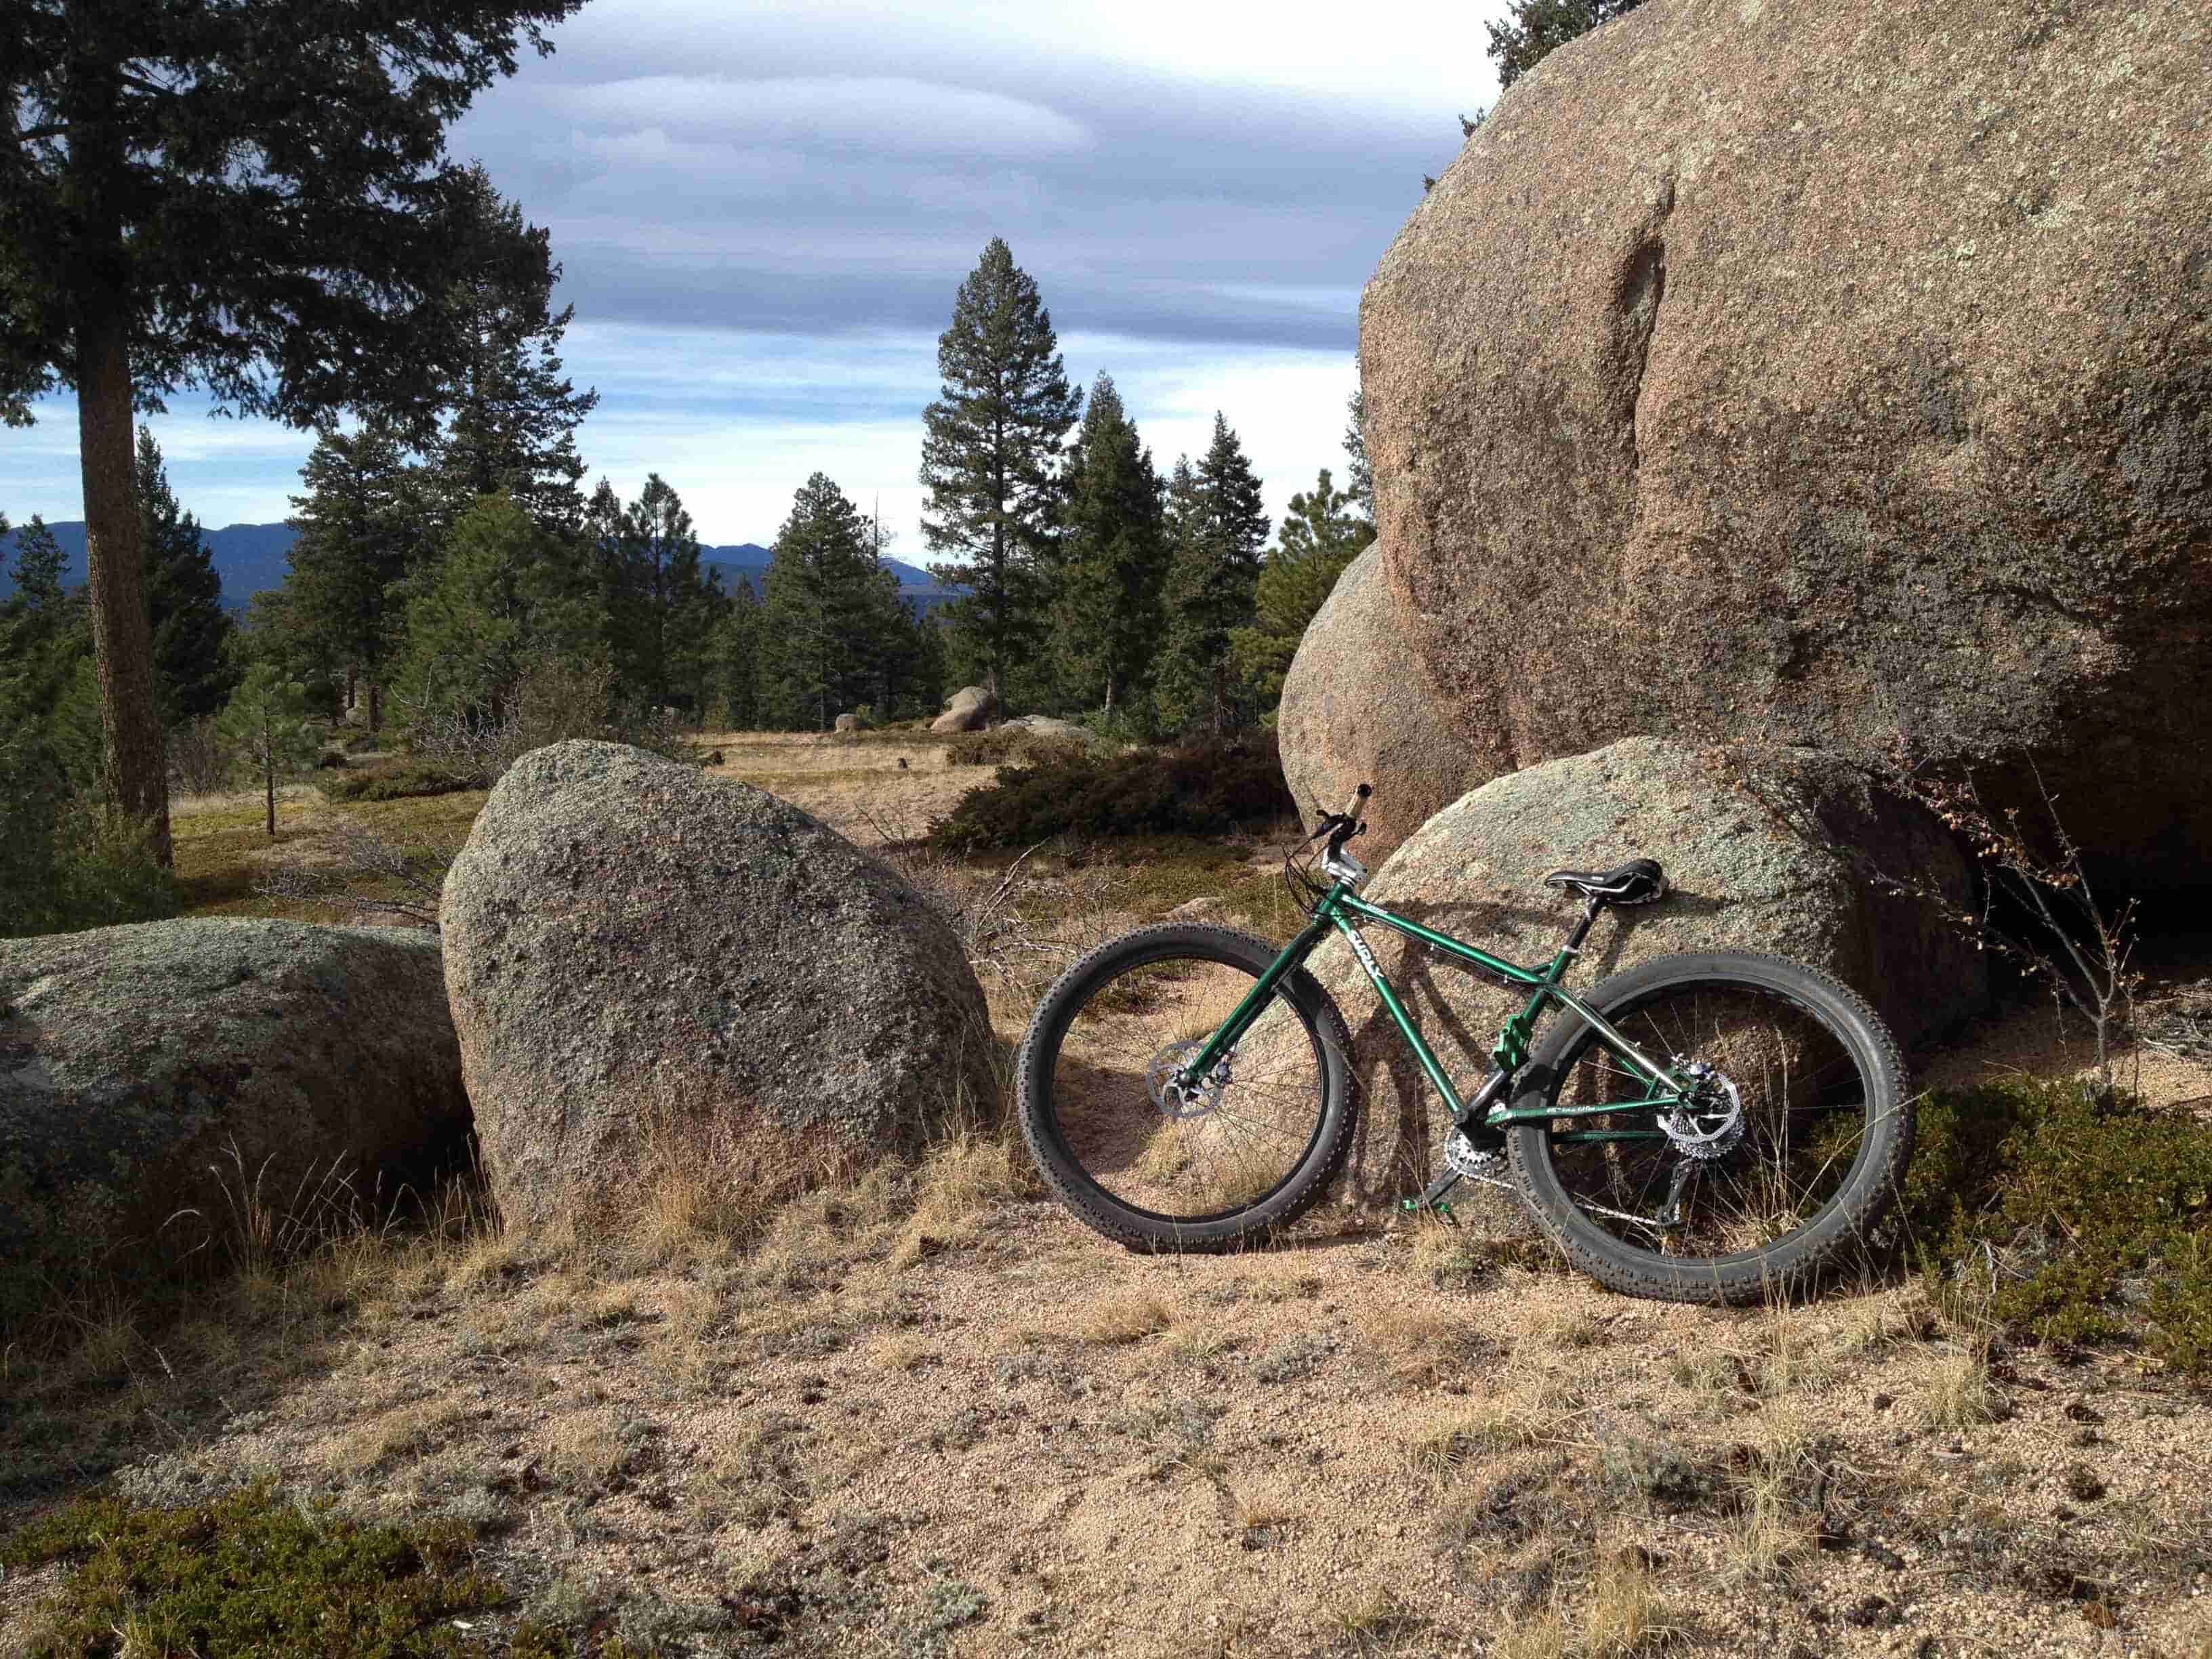 Left side view of a green Surly Krampus bike, leaning on a boulder with larger ones around it, in a forest clearing